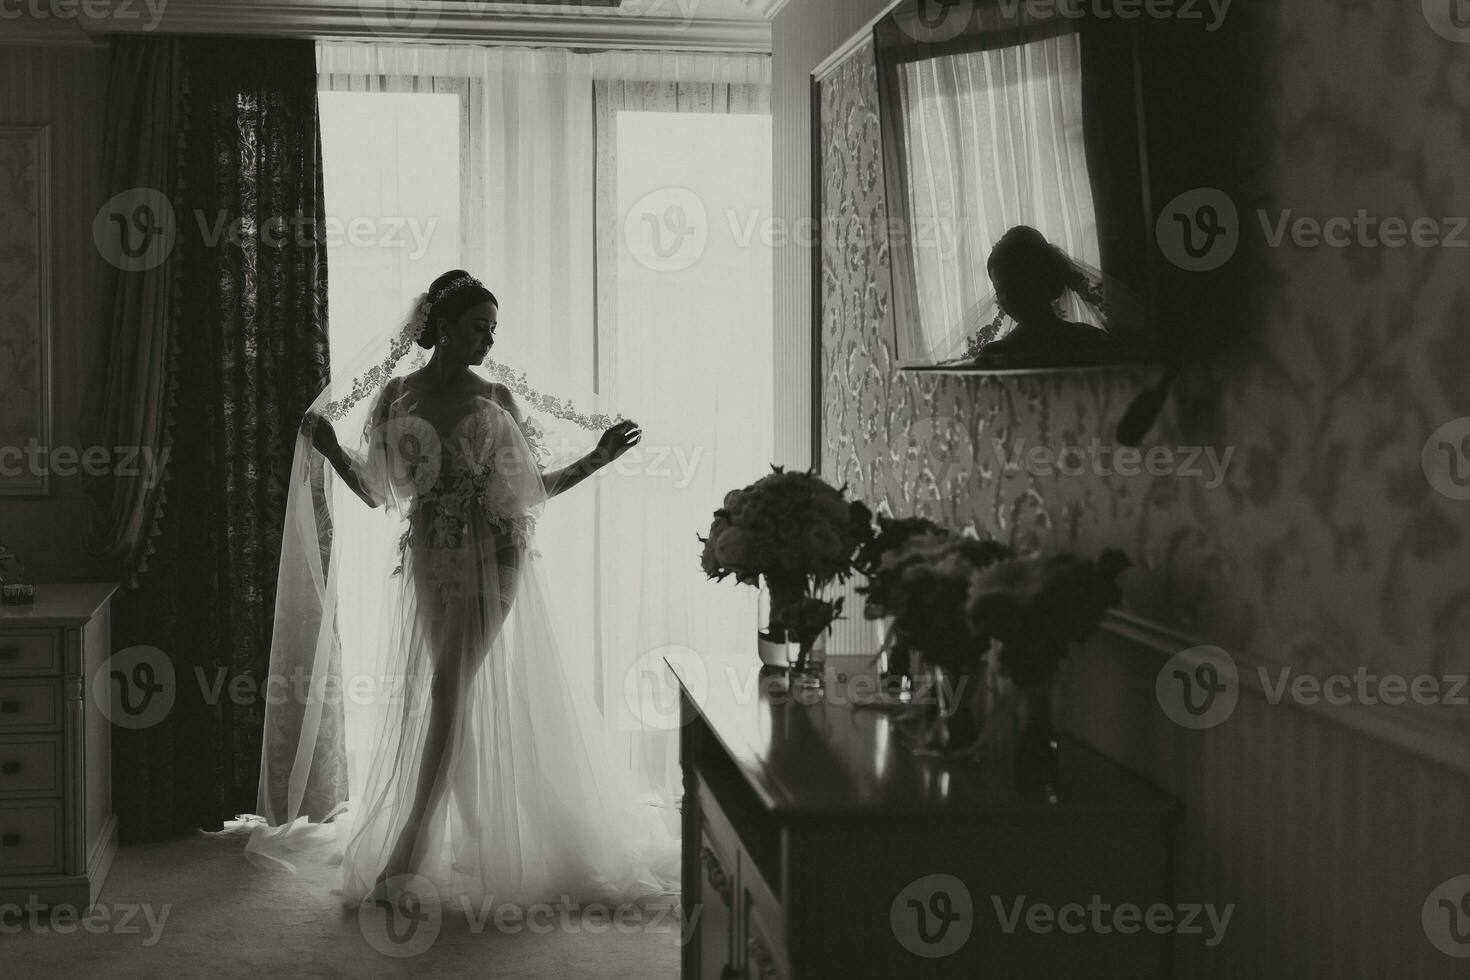 a beautiful girl with a wedding hairstyle and a tiara on her head in a transparent robe is preparing for a wedding in a hotel with a royal interior. photo